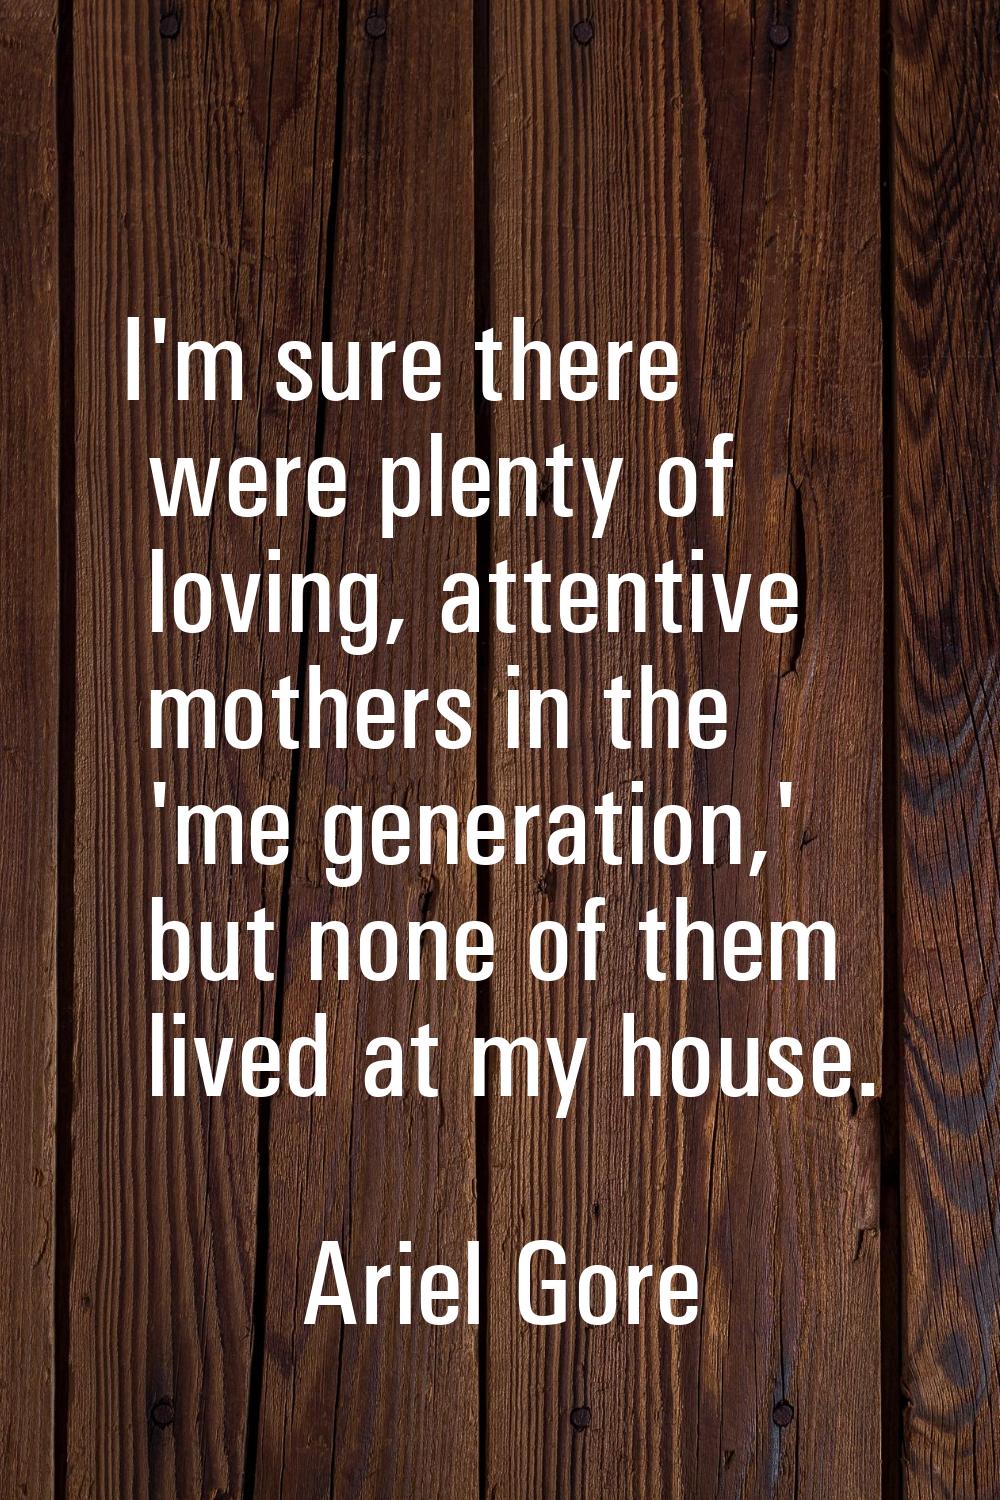 I'm sure there were plenty of loving, attentive mothers in the 'me generation,' but none of them li